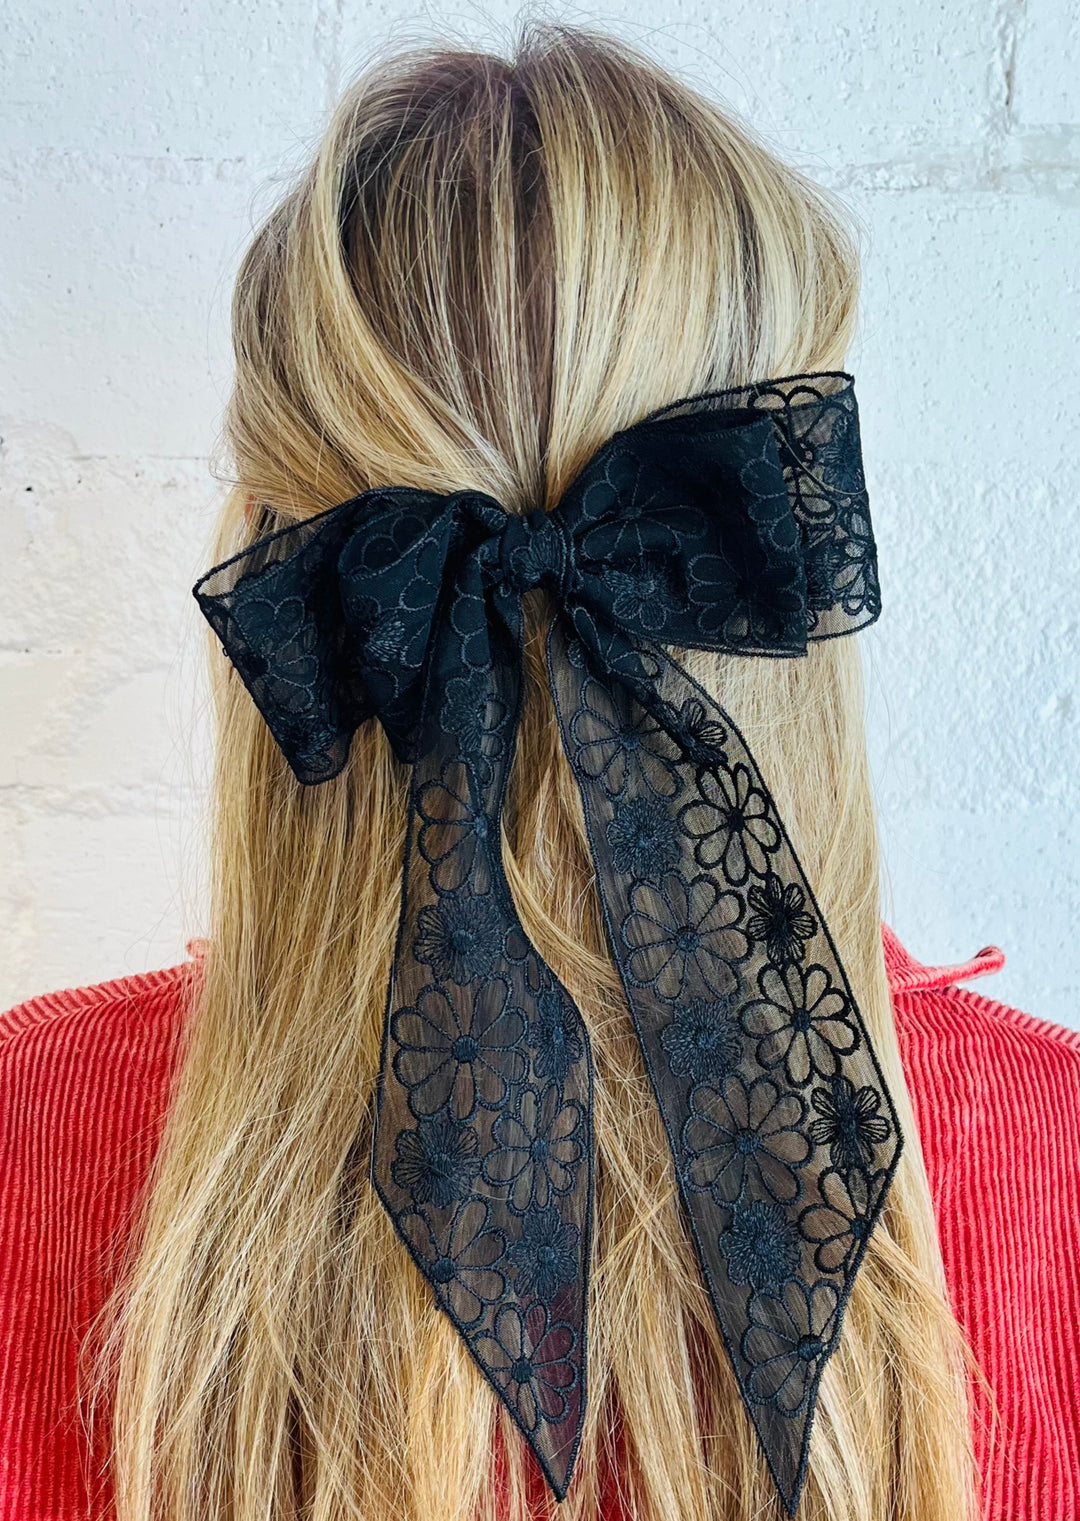 Embroidered Daisy Lace Hair Bow, Hair Ties, Adeline, Adeline, dallas boutique, dallas texas, texas boutique, women's boutique dallas, adeline boutique, dallas boutique, trendy boutique, affordable boutique